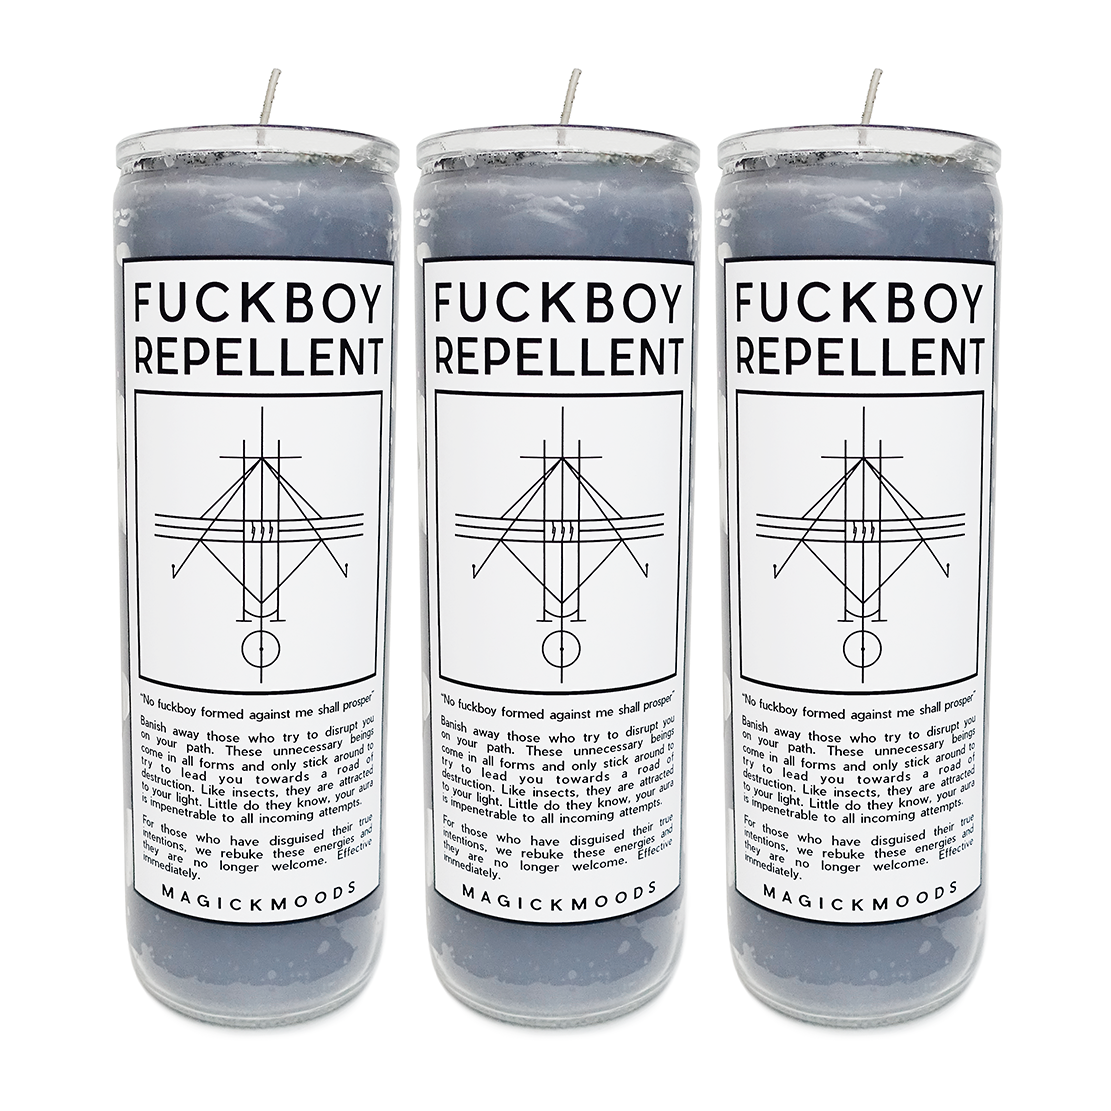 Fuckboy Repellent 7-Day Meditation Candle - PREORDER - Ships by Feb 26th, 2024